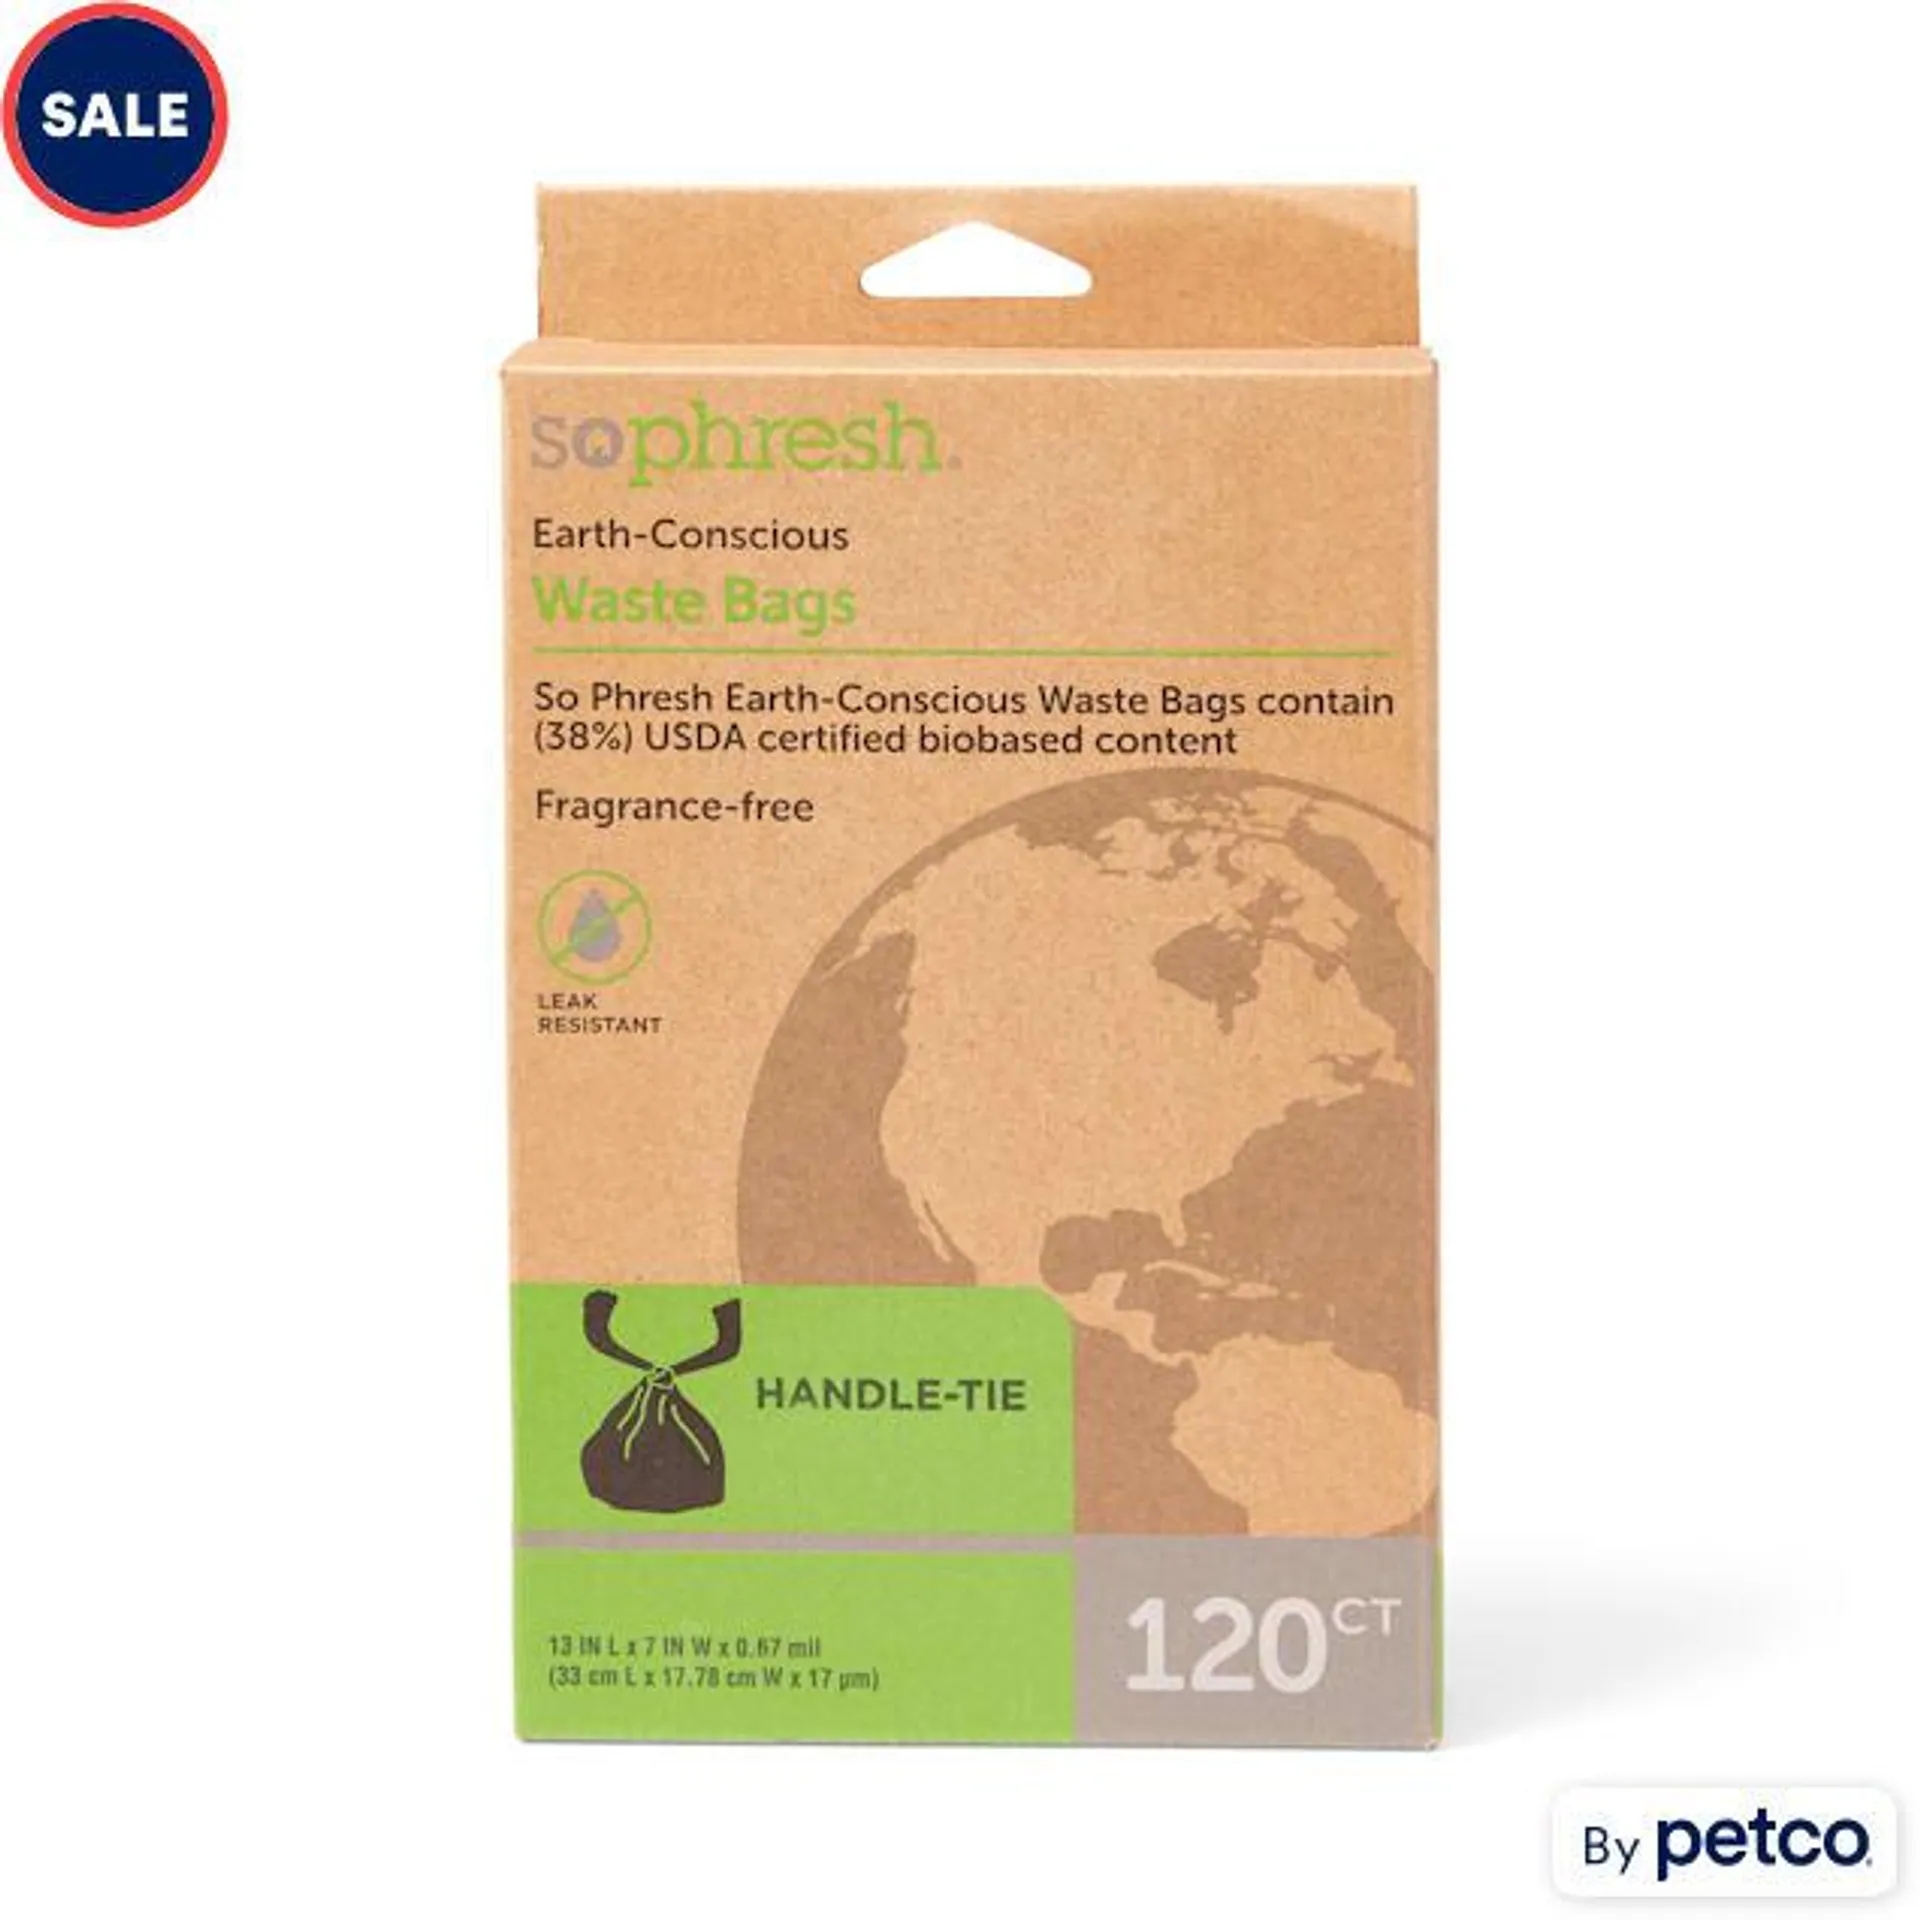 So Phresh Earth-Conscious 38% USDA Certified Biobased Content With Handle Tie Dog Waste Bags, Count of 120